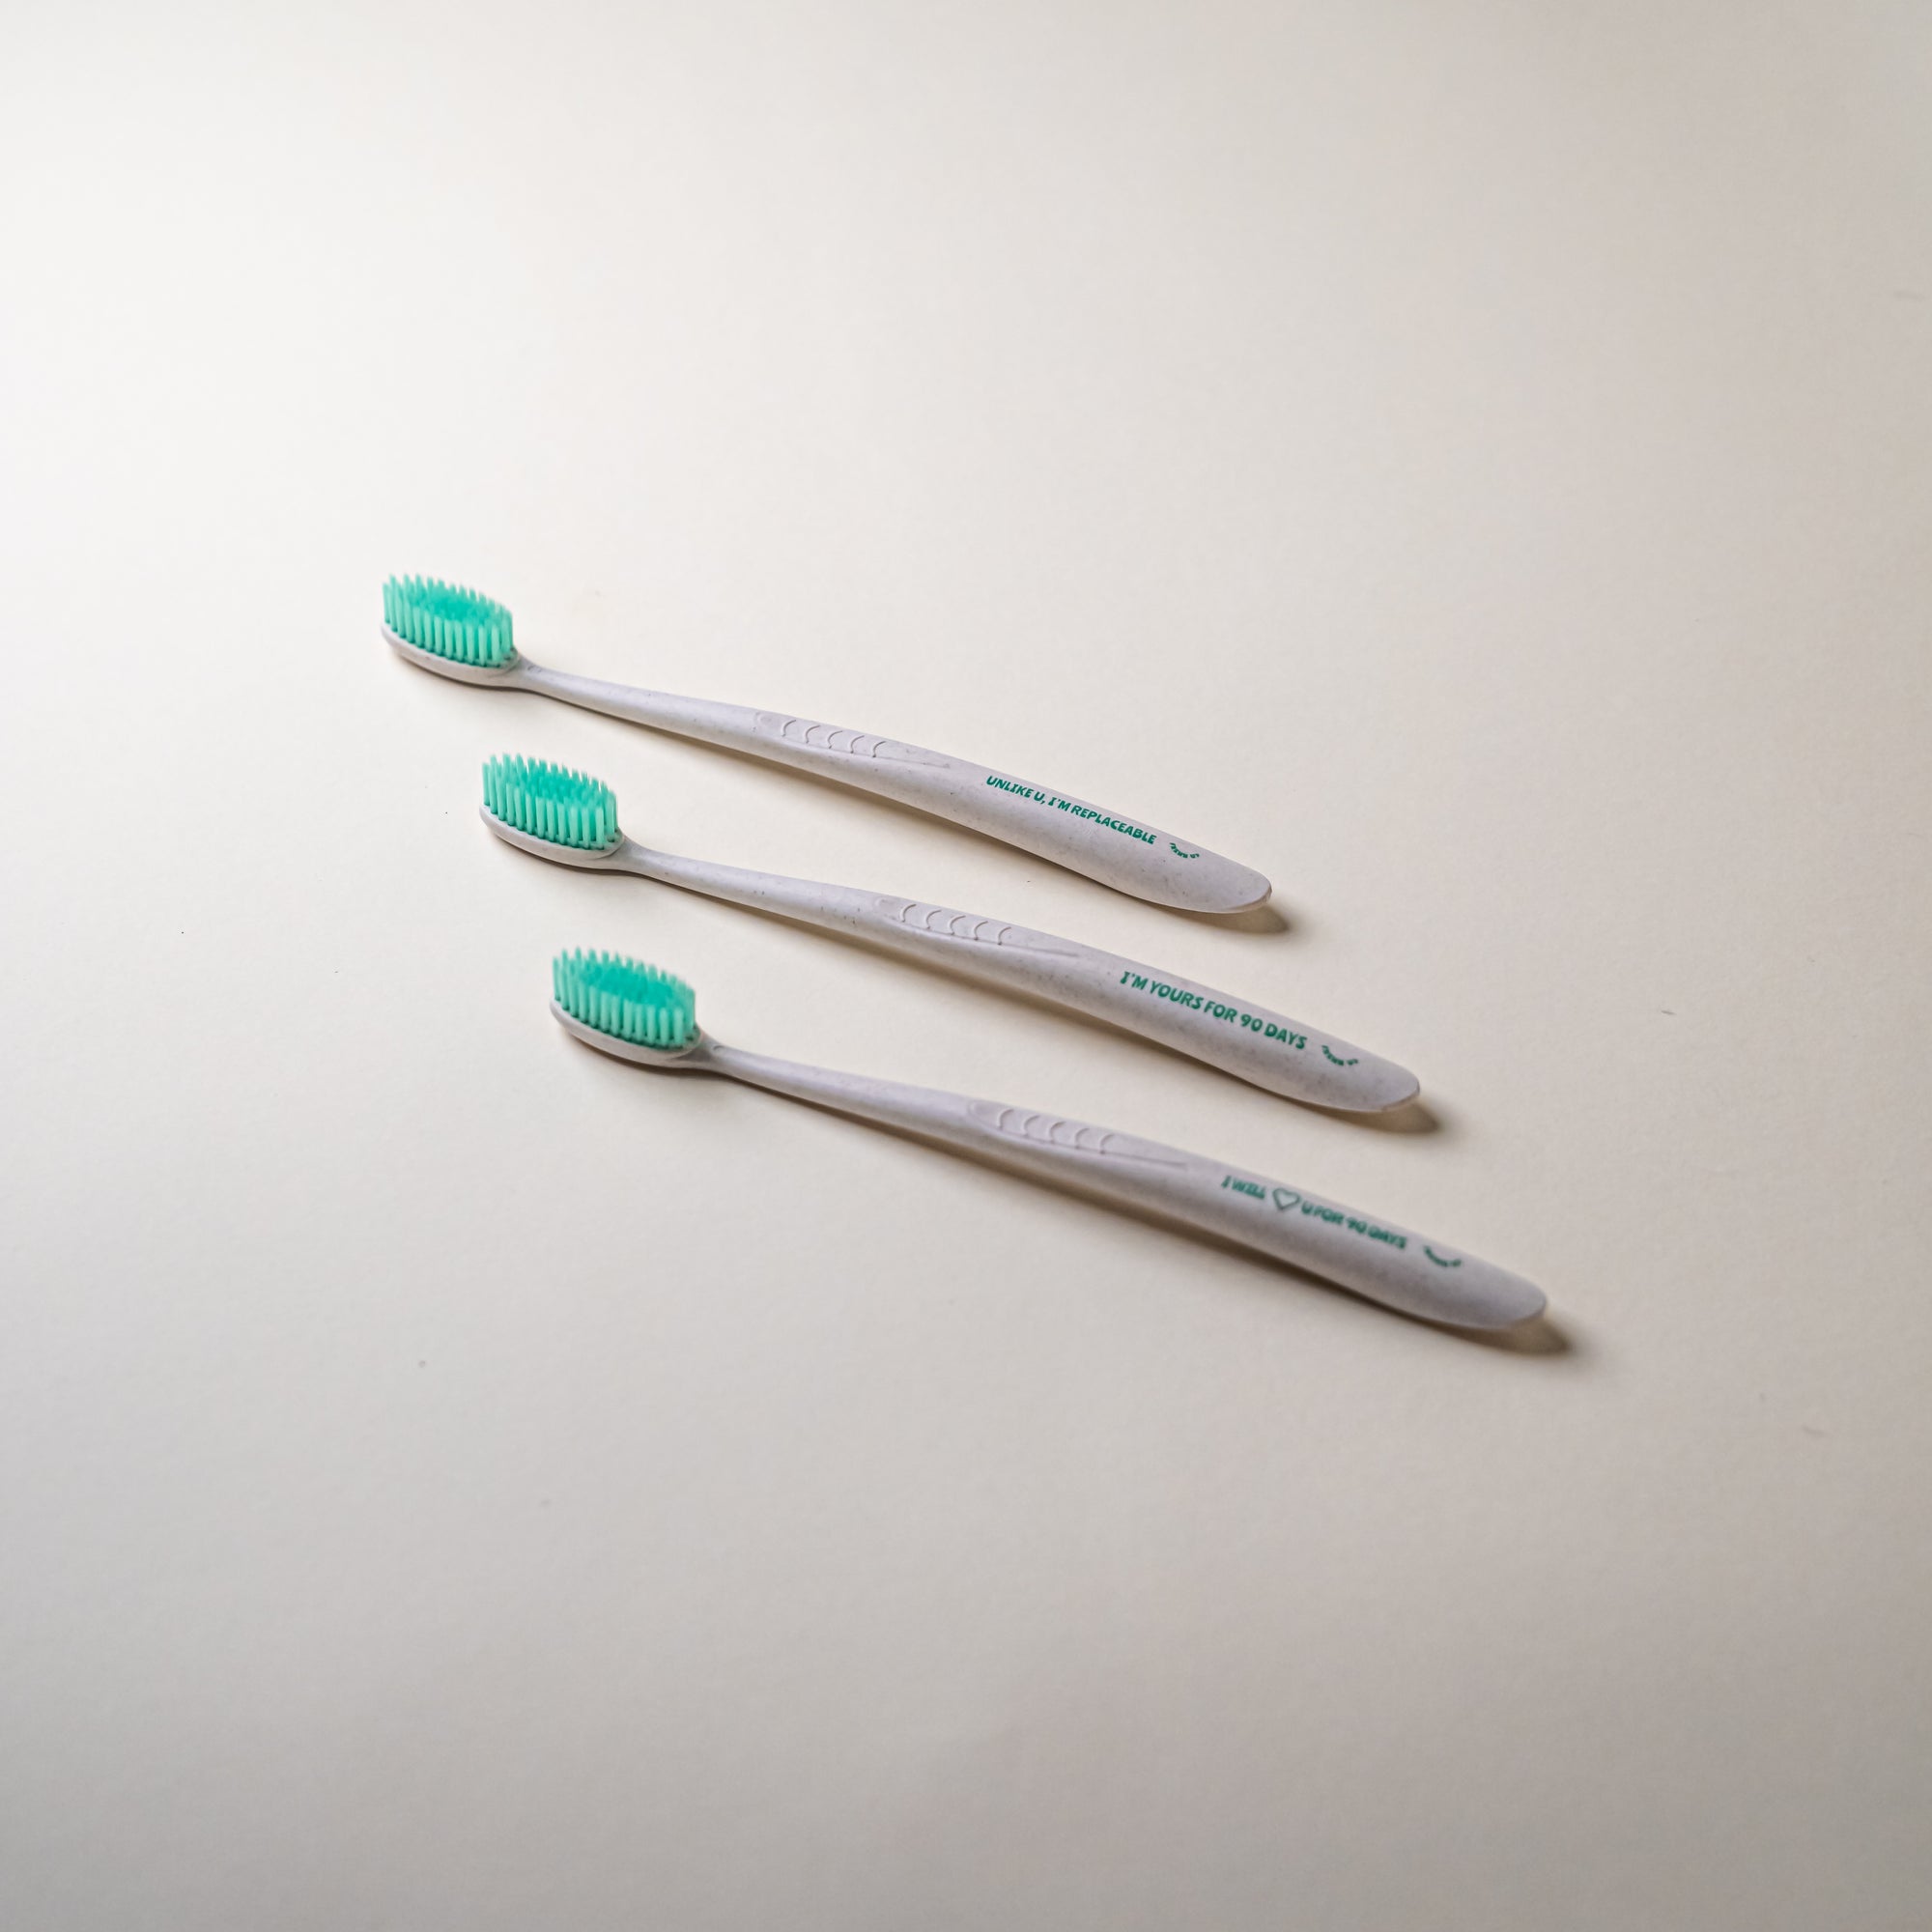 Three FRSHN UP OG Toothbrushes with bristles on a white surface.